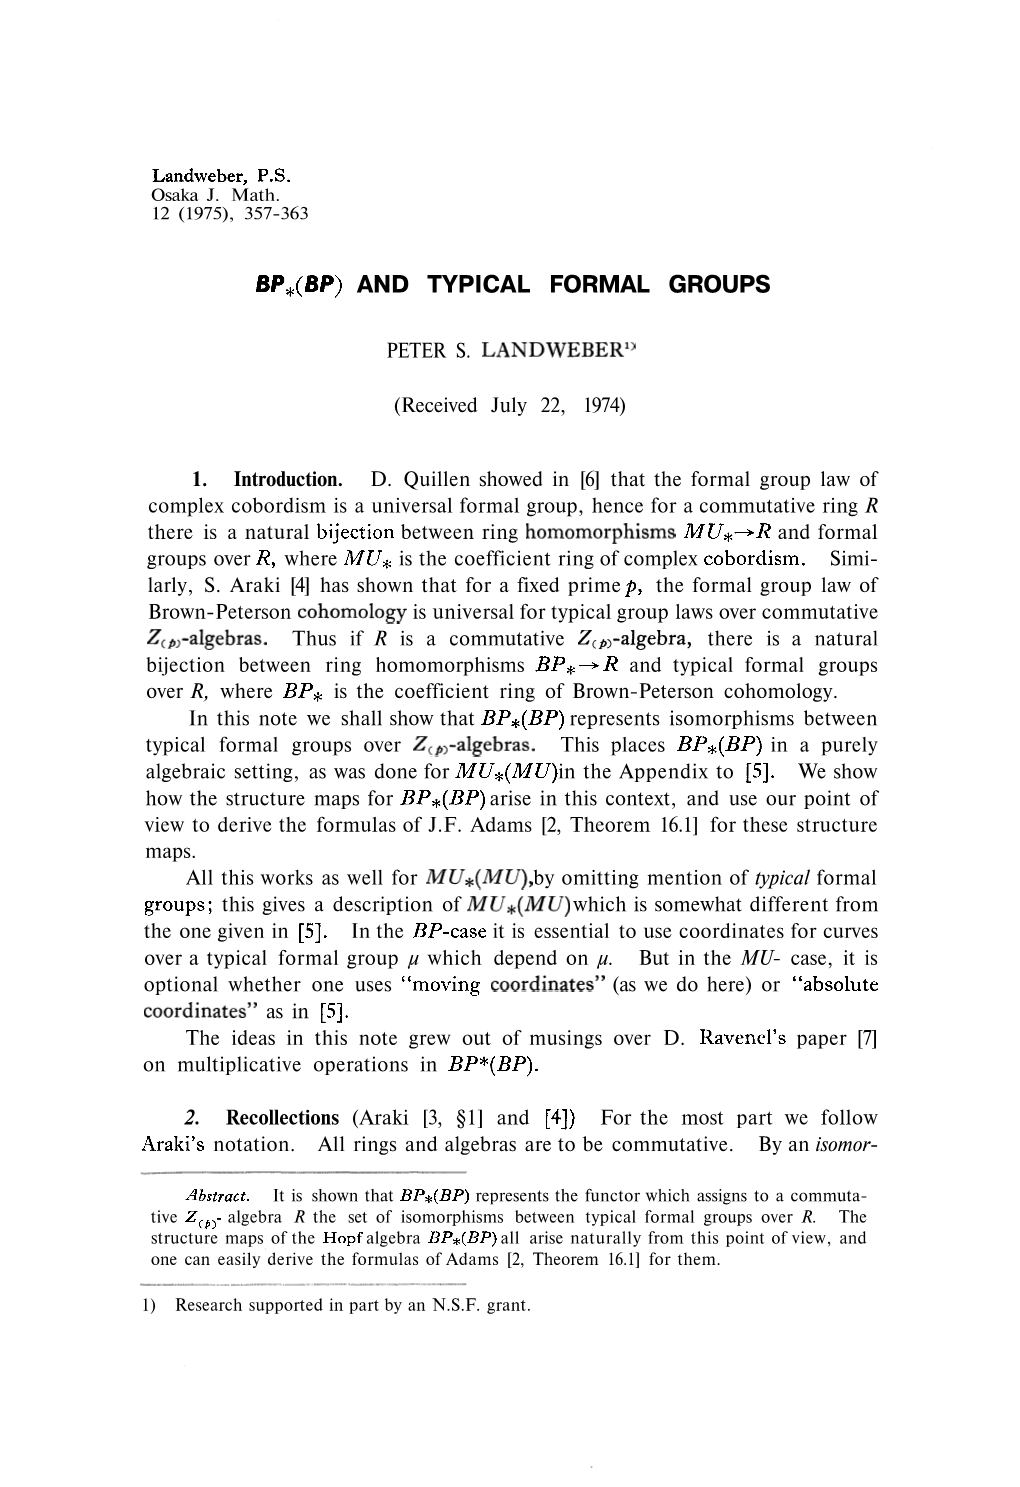 (Bp) and Typical Formal Groups